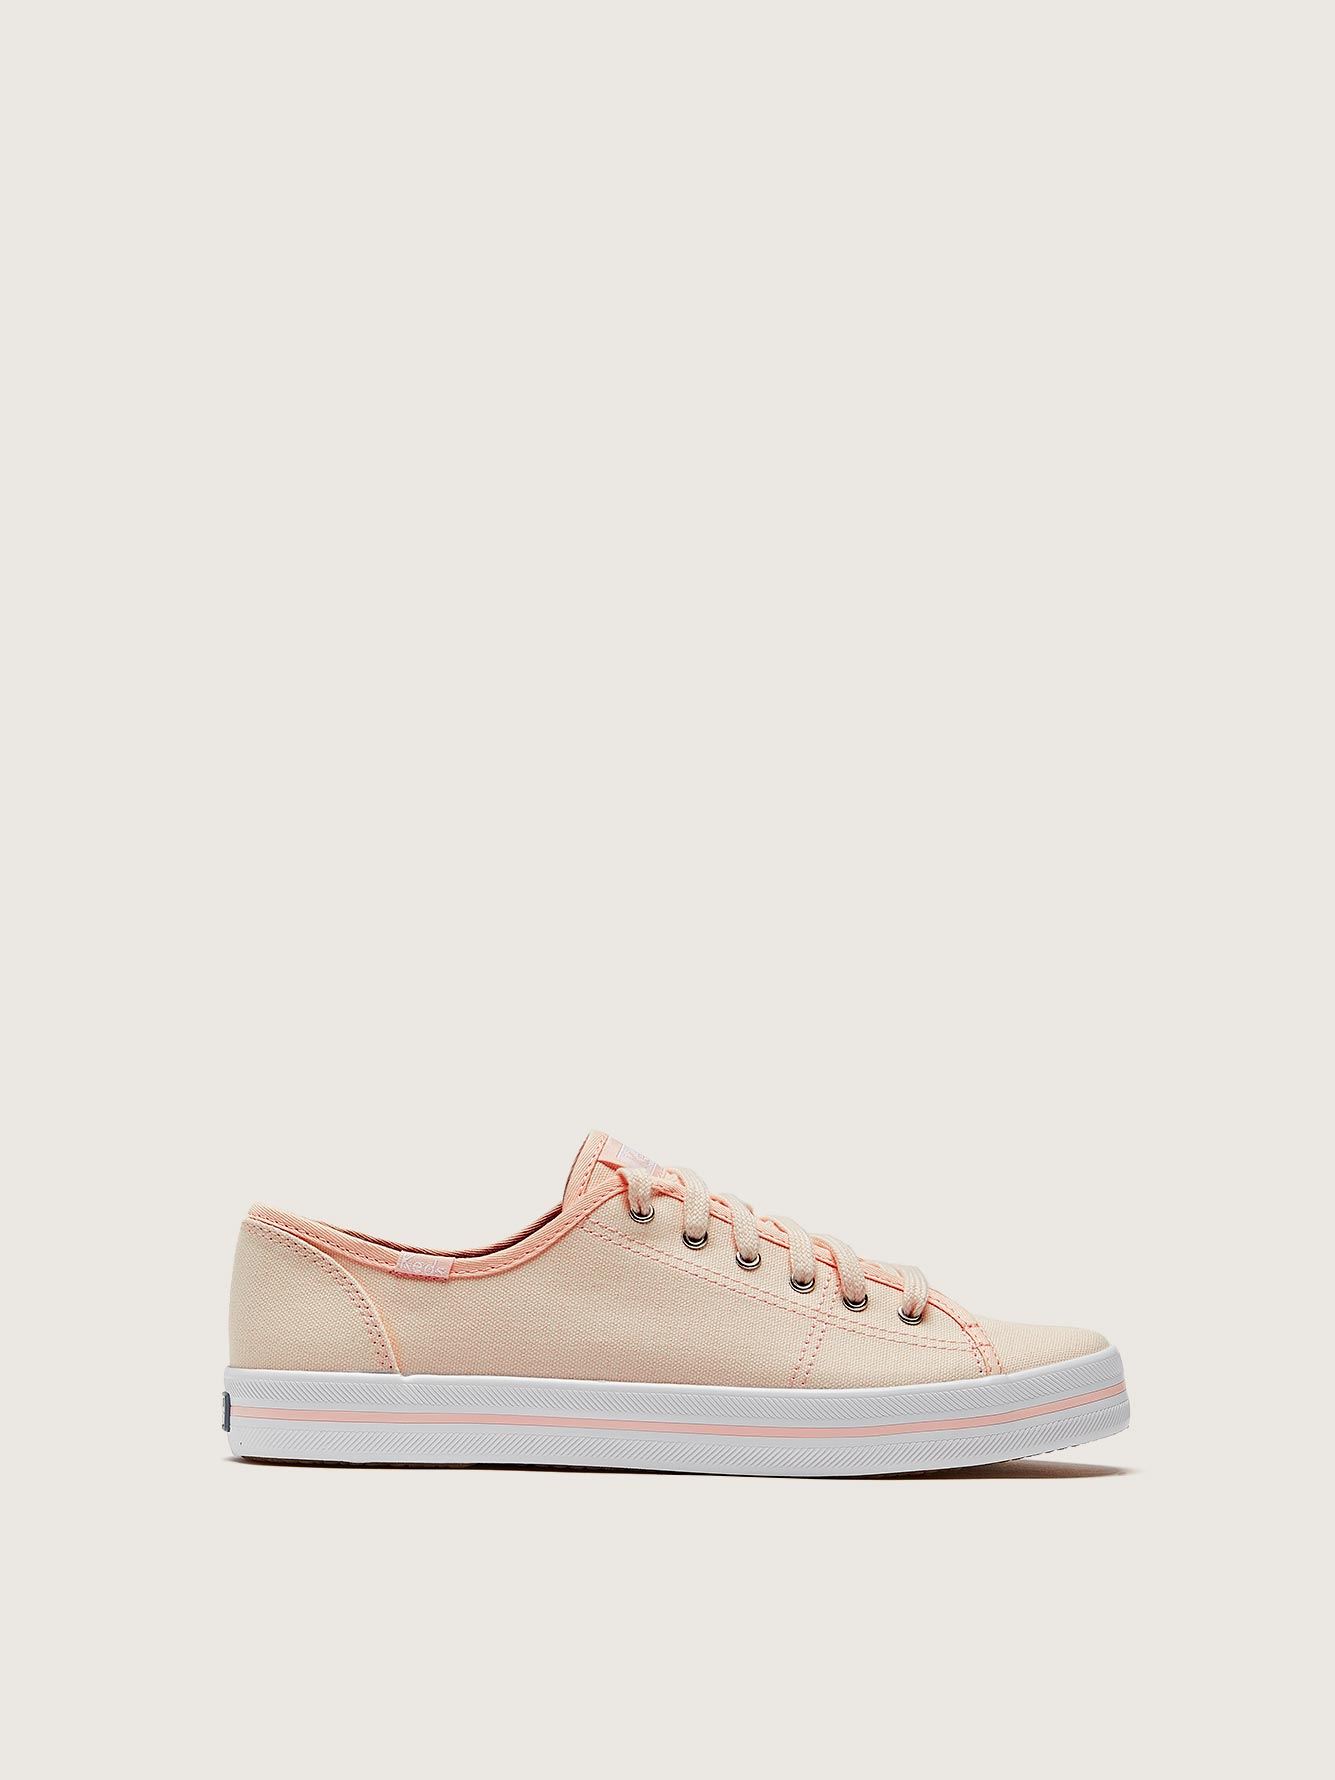 wide canvas sneakers